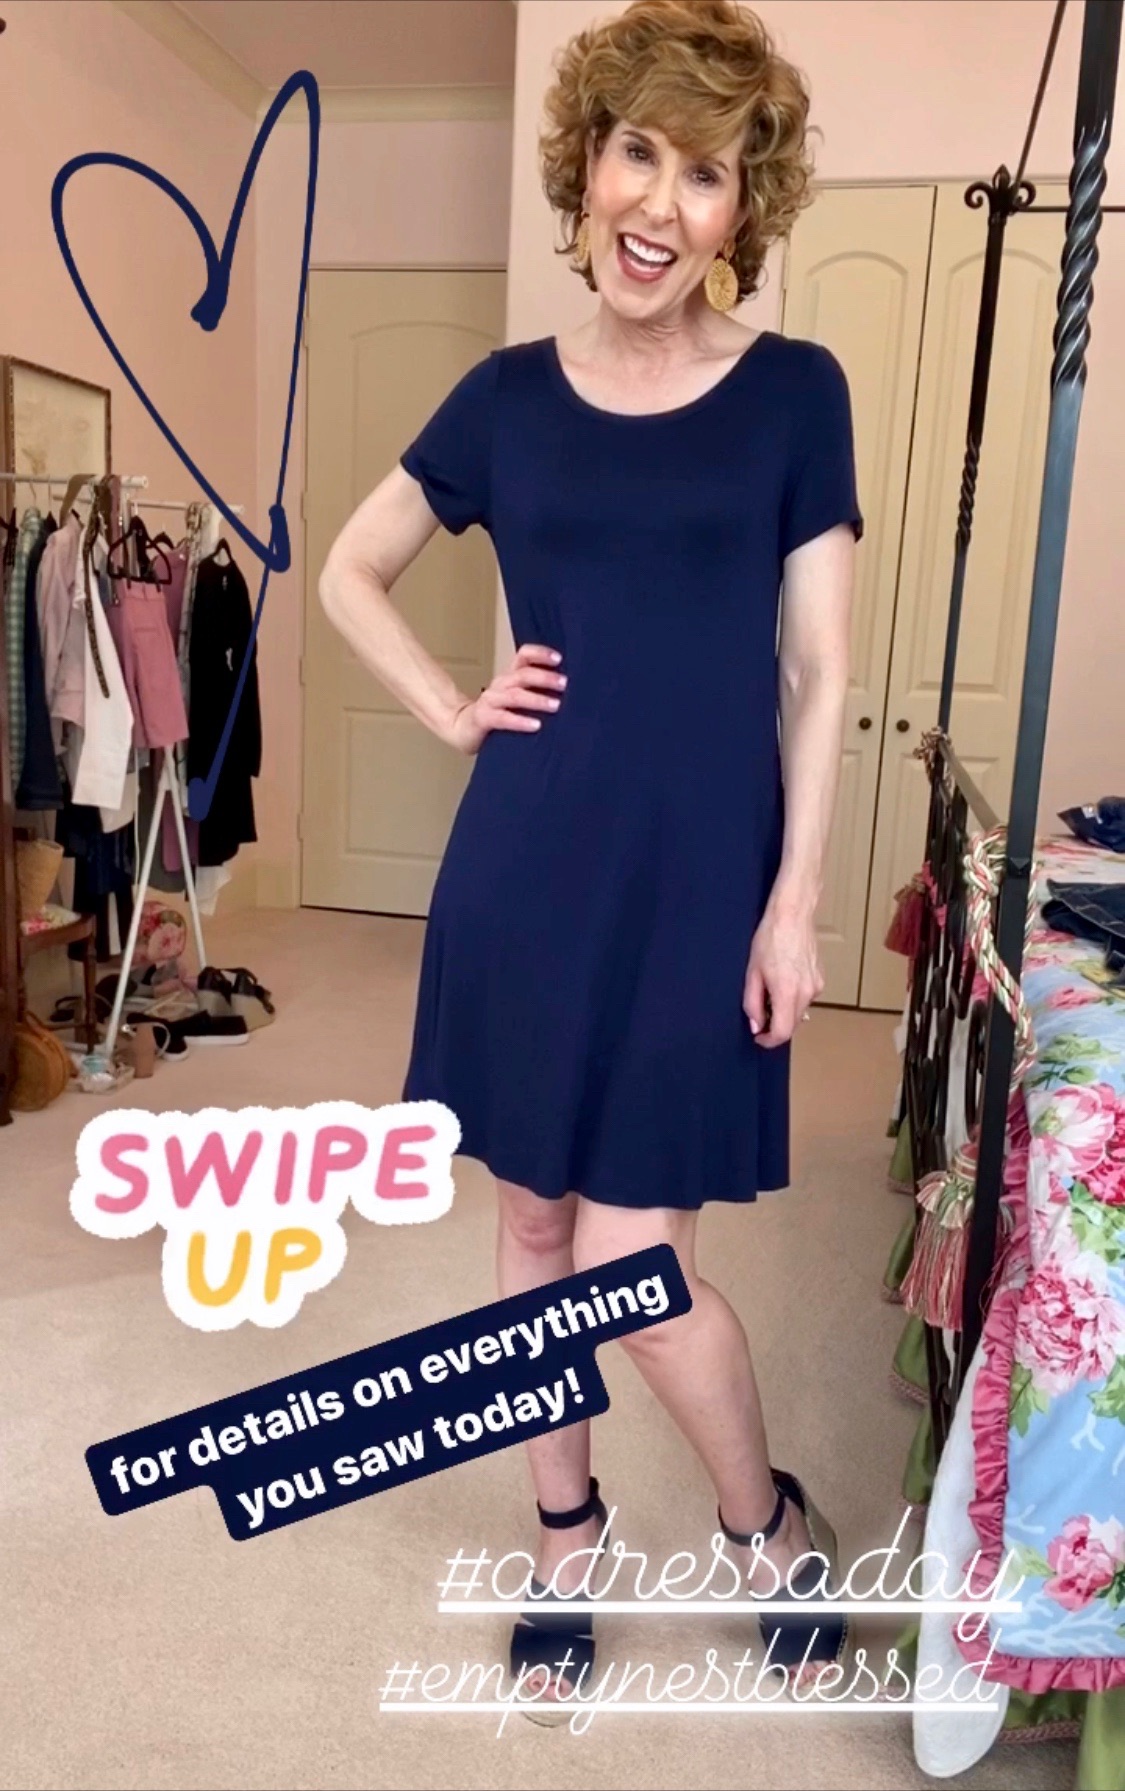 woman in navy blue dress in colorful bedroom with text on photo